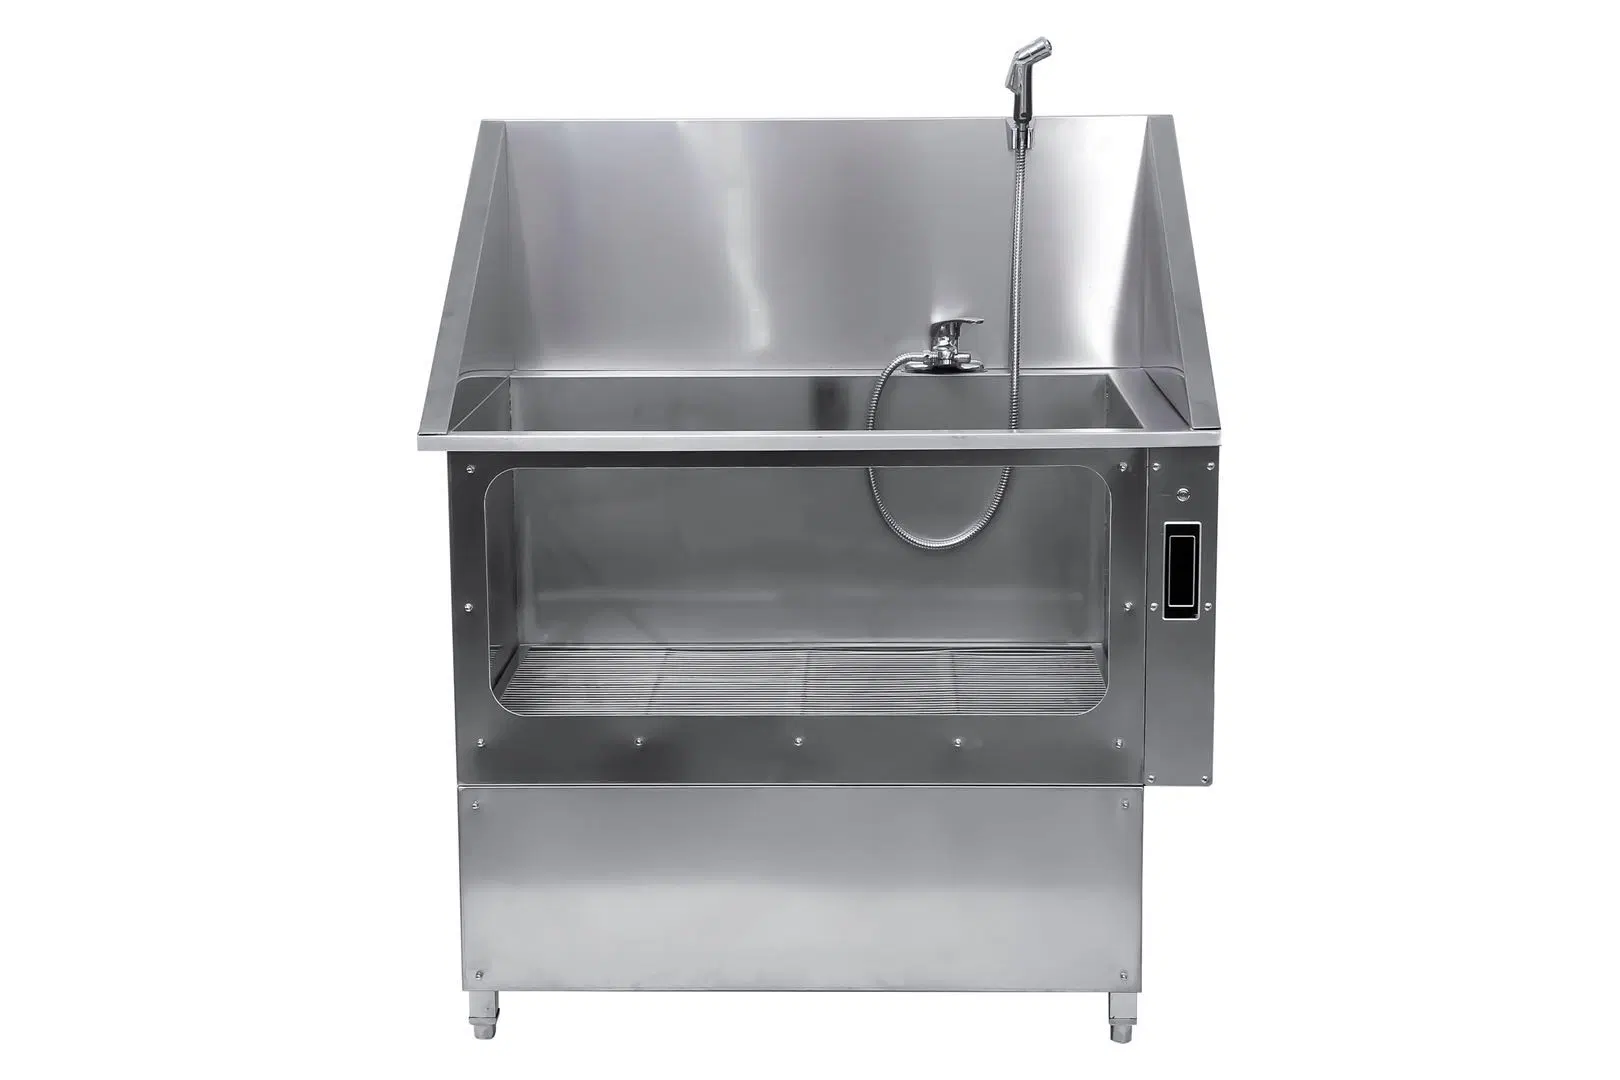 Hochey Medcial High Quality Veterinary Equipment Stainless Steel Washing Sink Dog Grooming Bath Sink with Surfing Pool